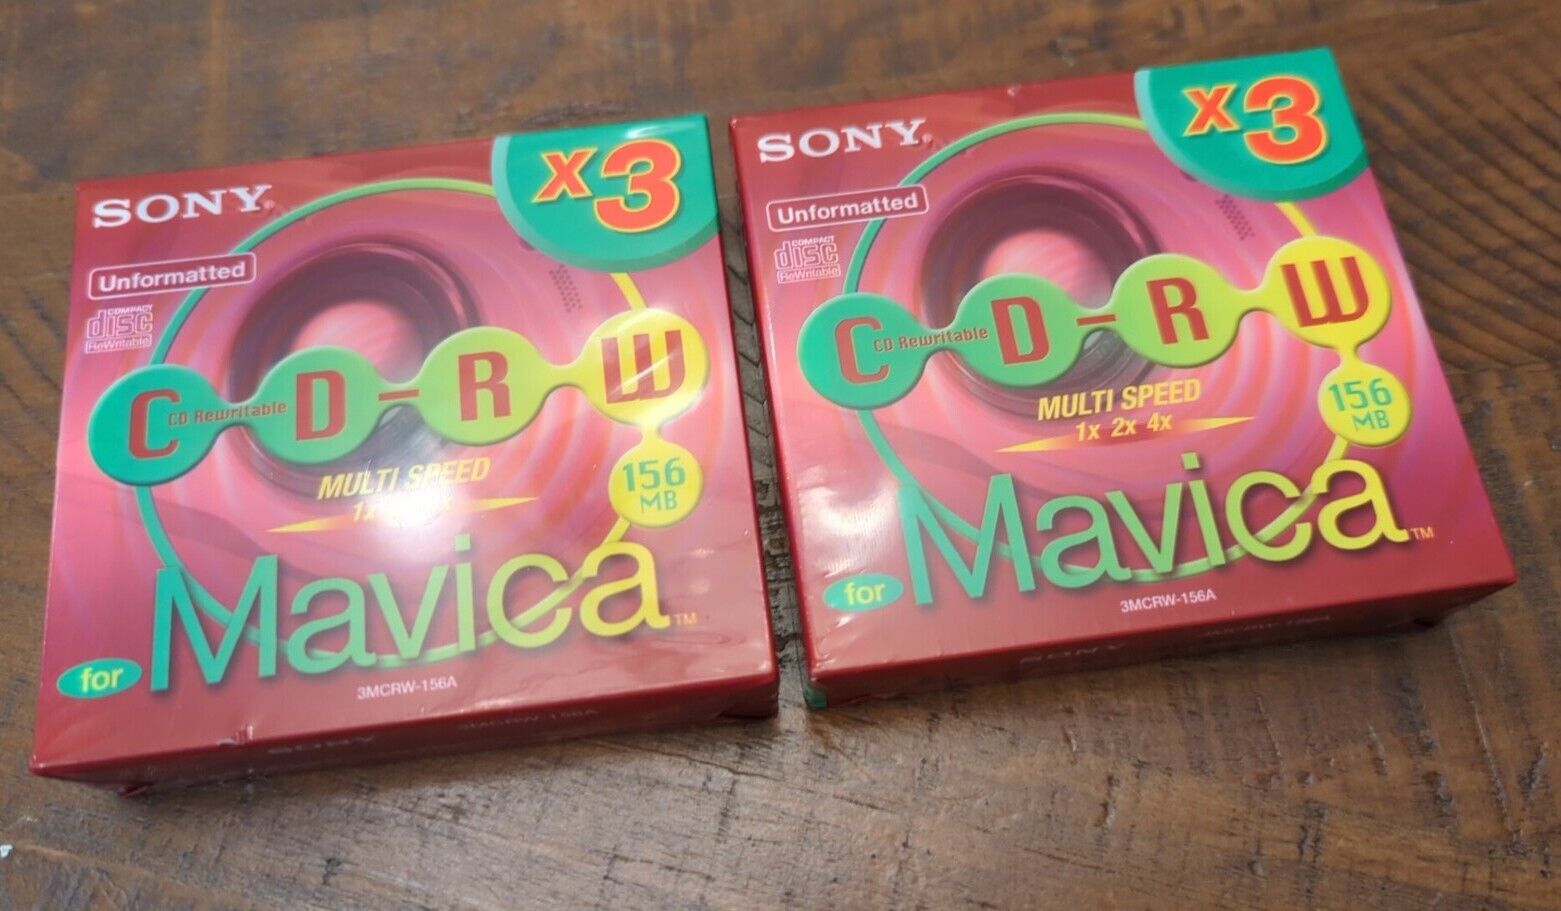 6 x Discs SONY CD-RW 3 Pack For Mavica Camera 3MCDRW-156A Disc 156MB Rewriteable